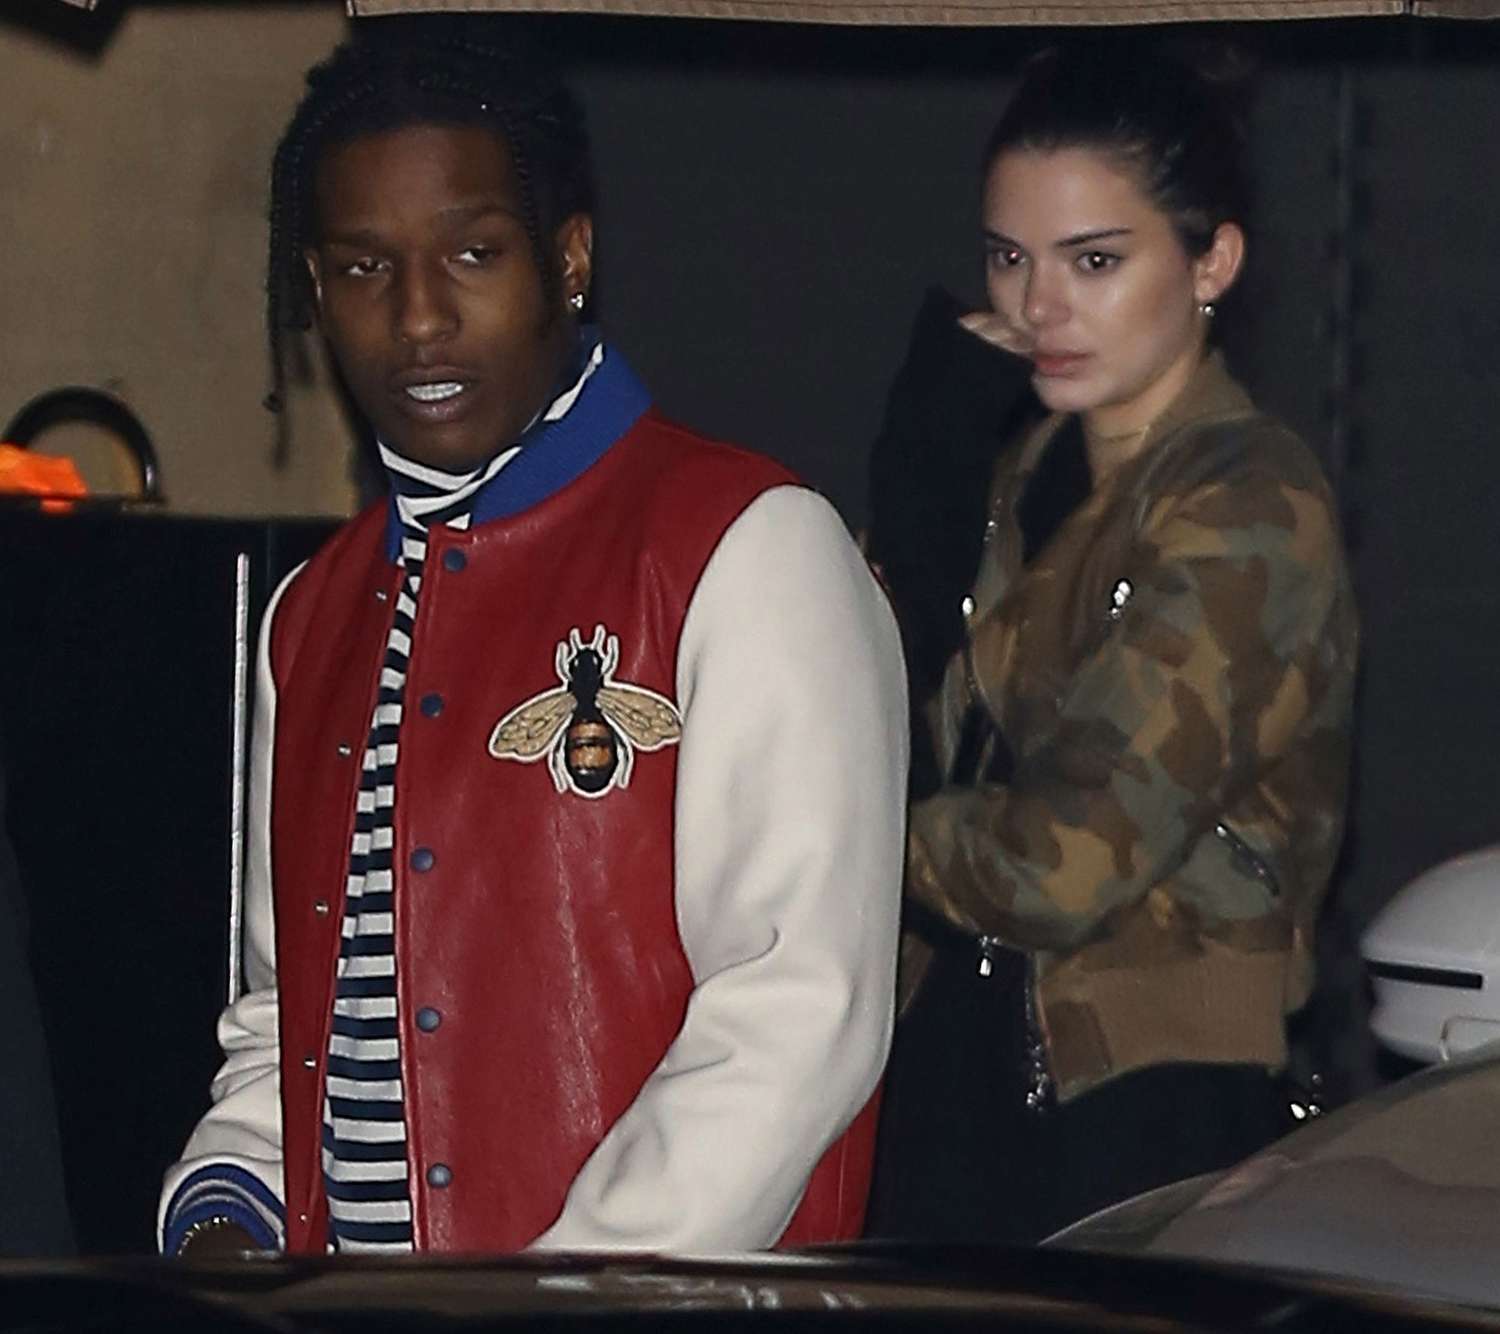 *EXCLUSIVE* Kendall Jenner and A$AP Rocky have a Date Night at Nobu Malibu